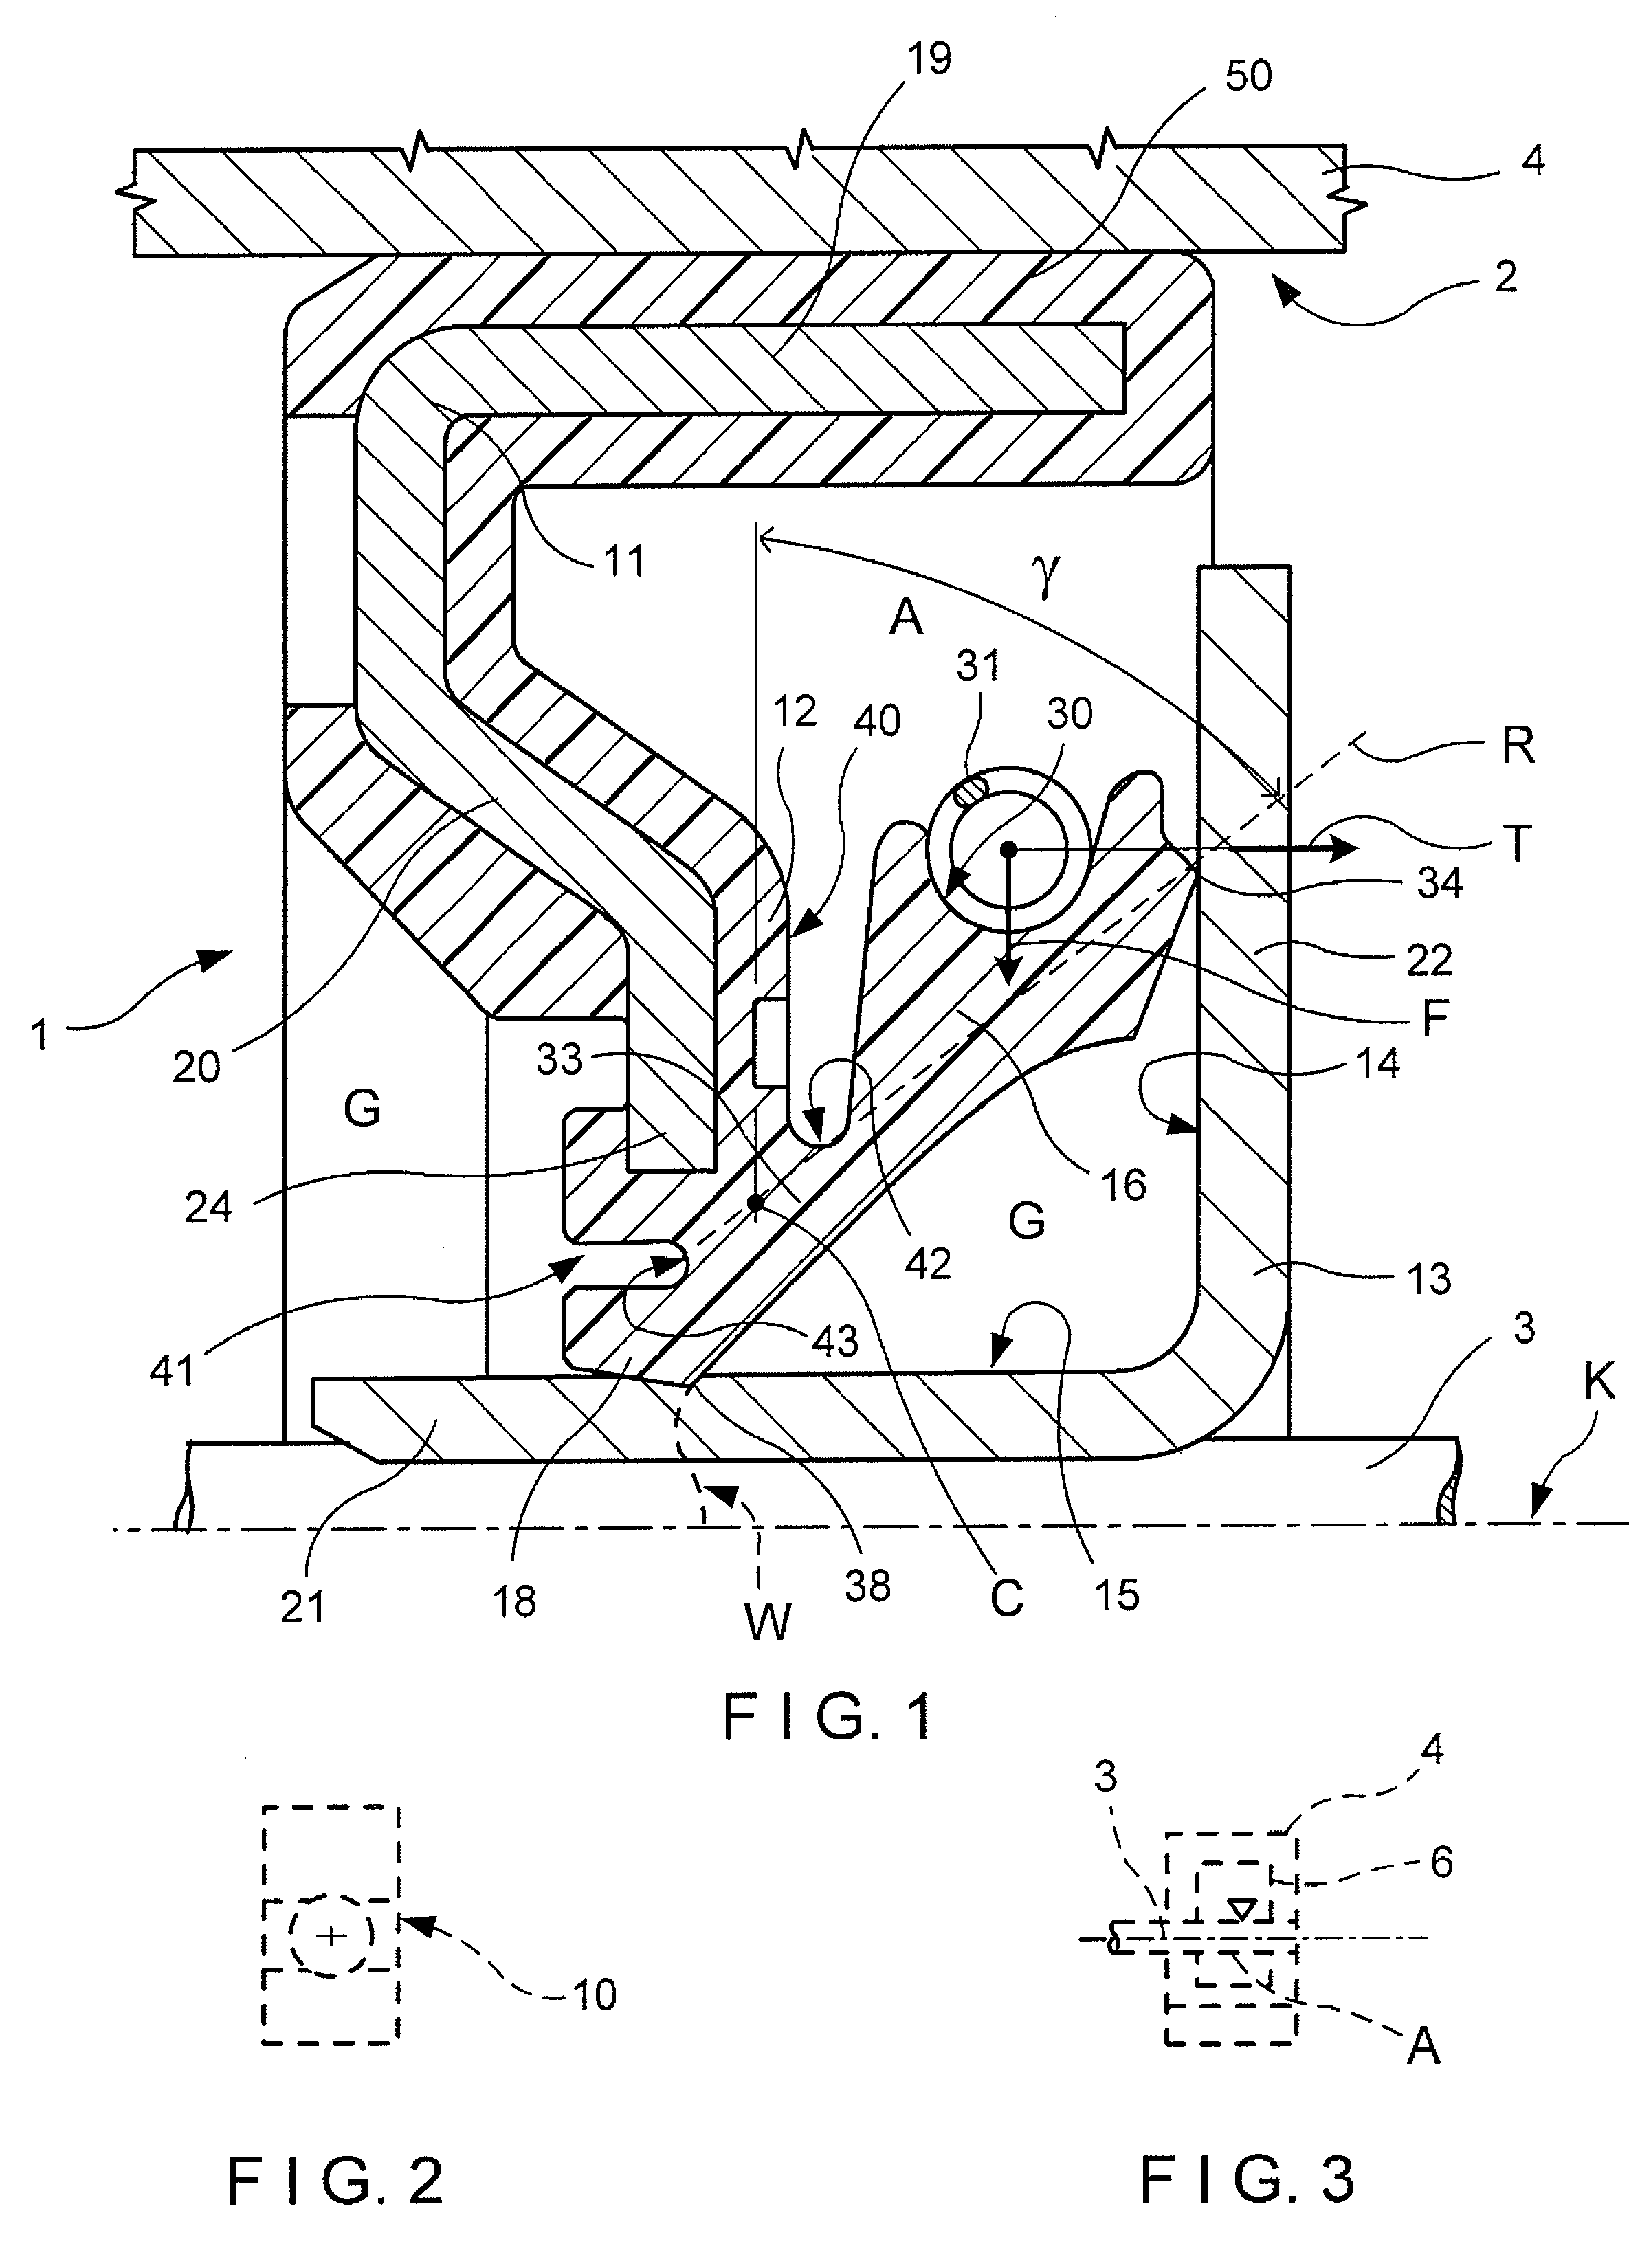 Annular seal assembly for insertion between two relatively rotatable members and method for its use